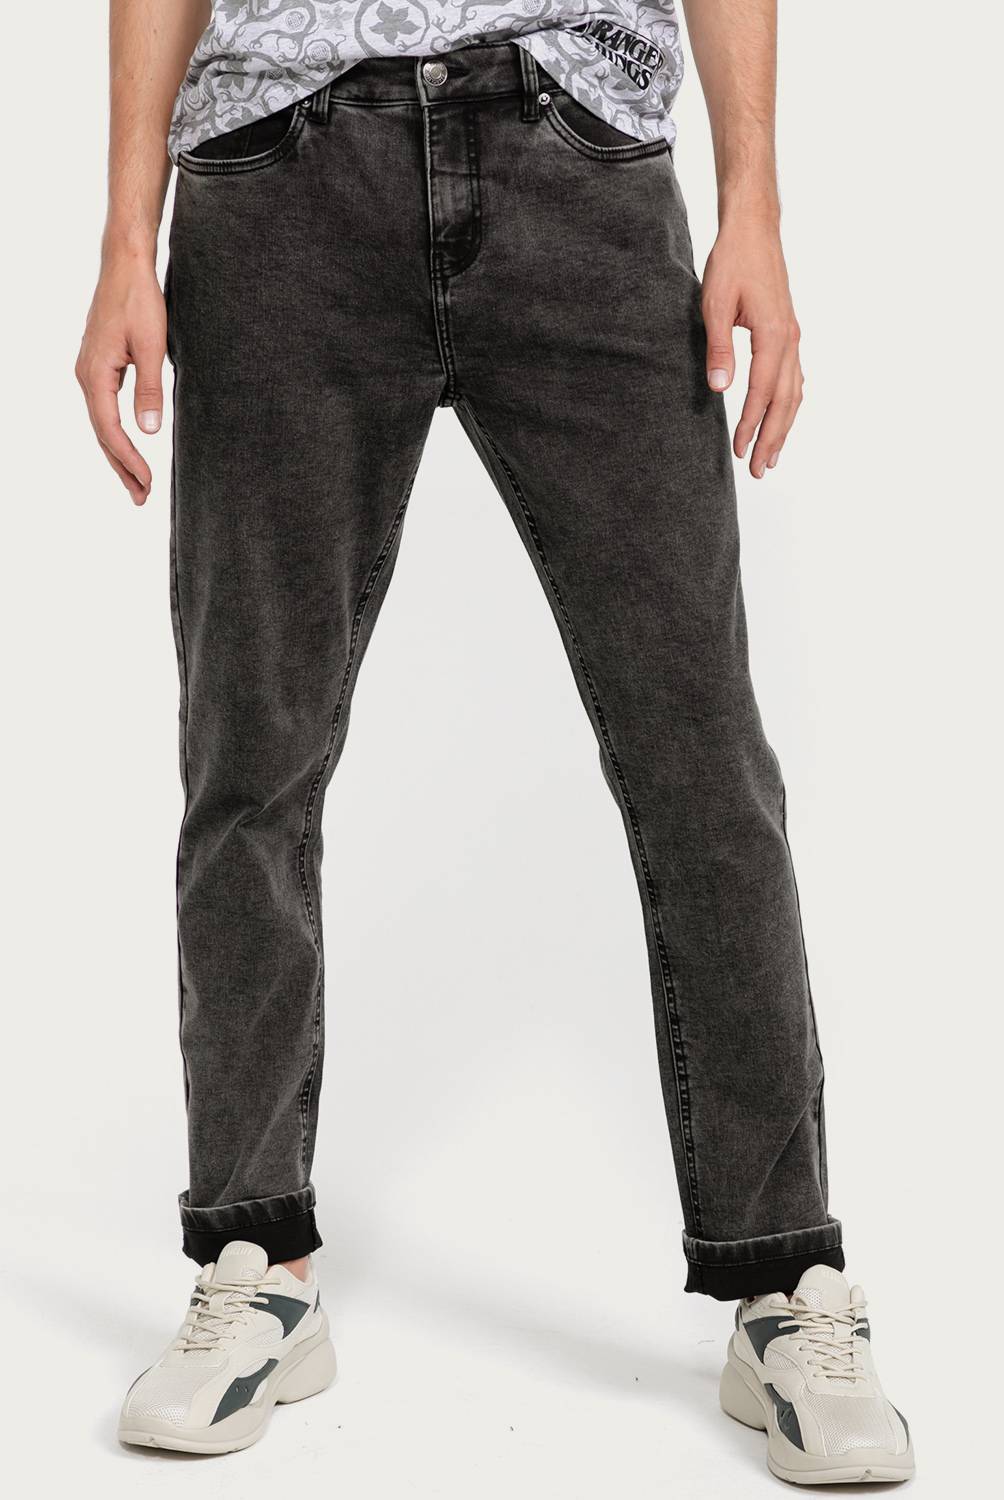 BEARCLIFF - Jeans Slim Fit Hombre  Bearcliff